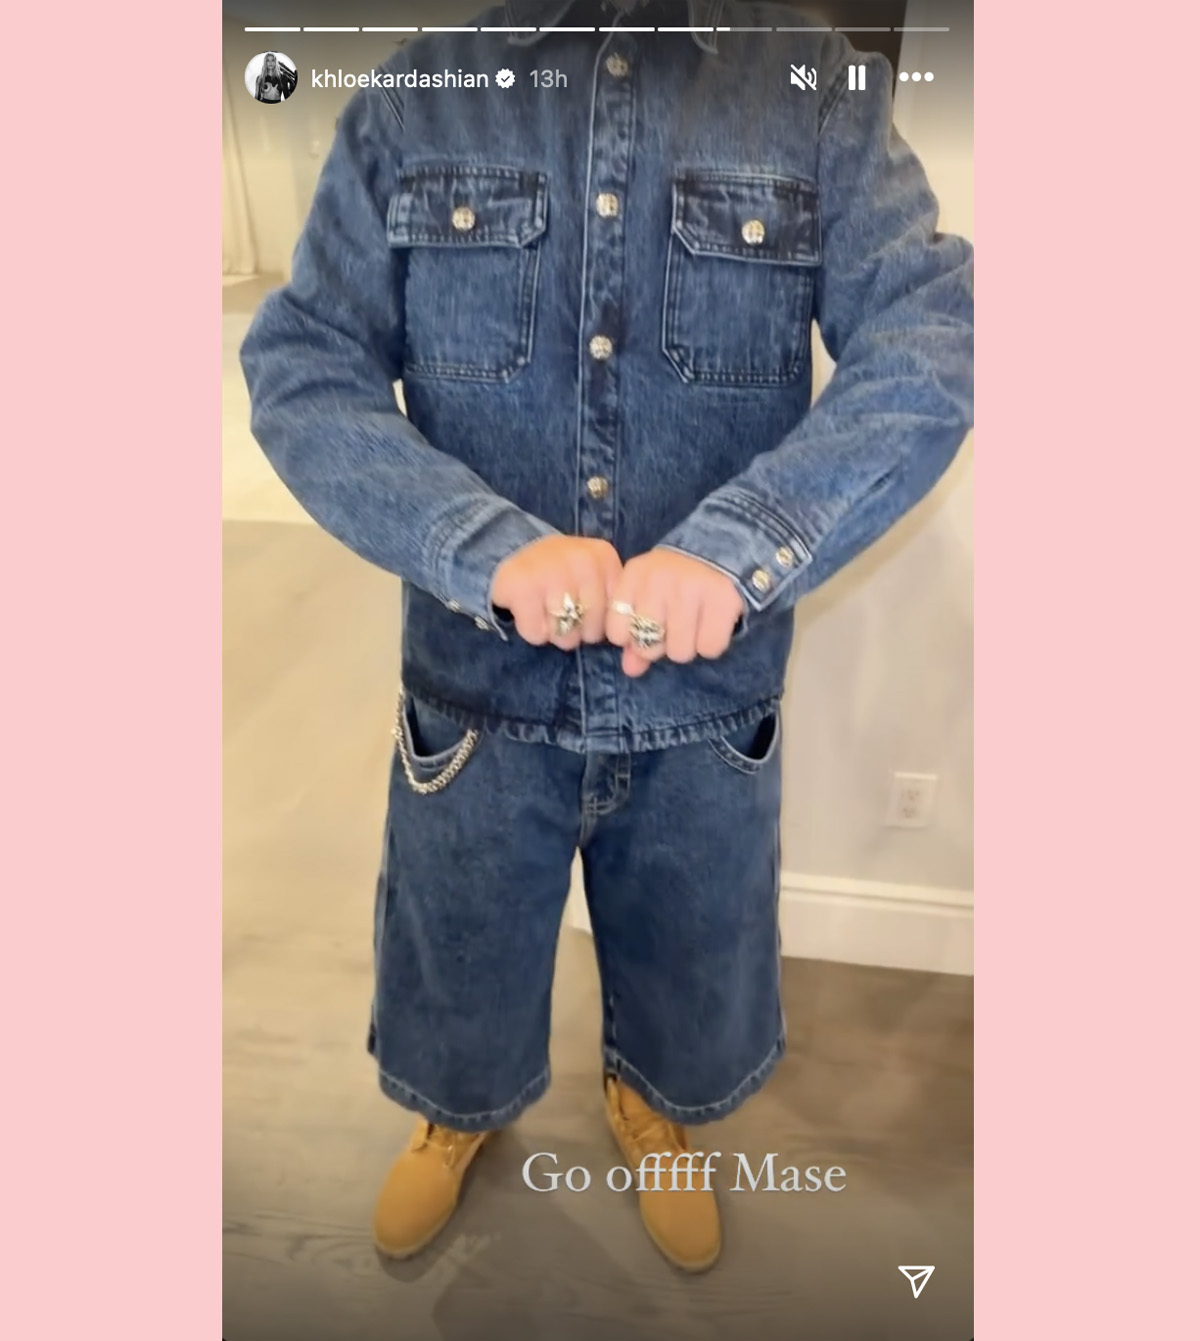 Mason Disick Pops Up For Super Rare Fit Check Thanks To Khloé Kardashian! Look!